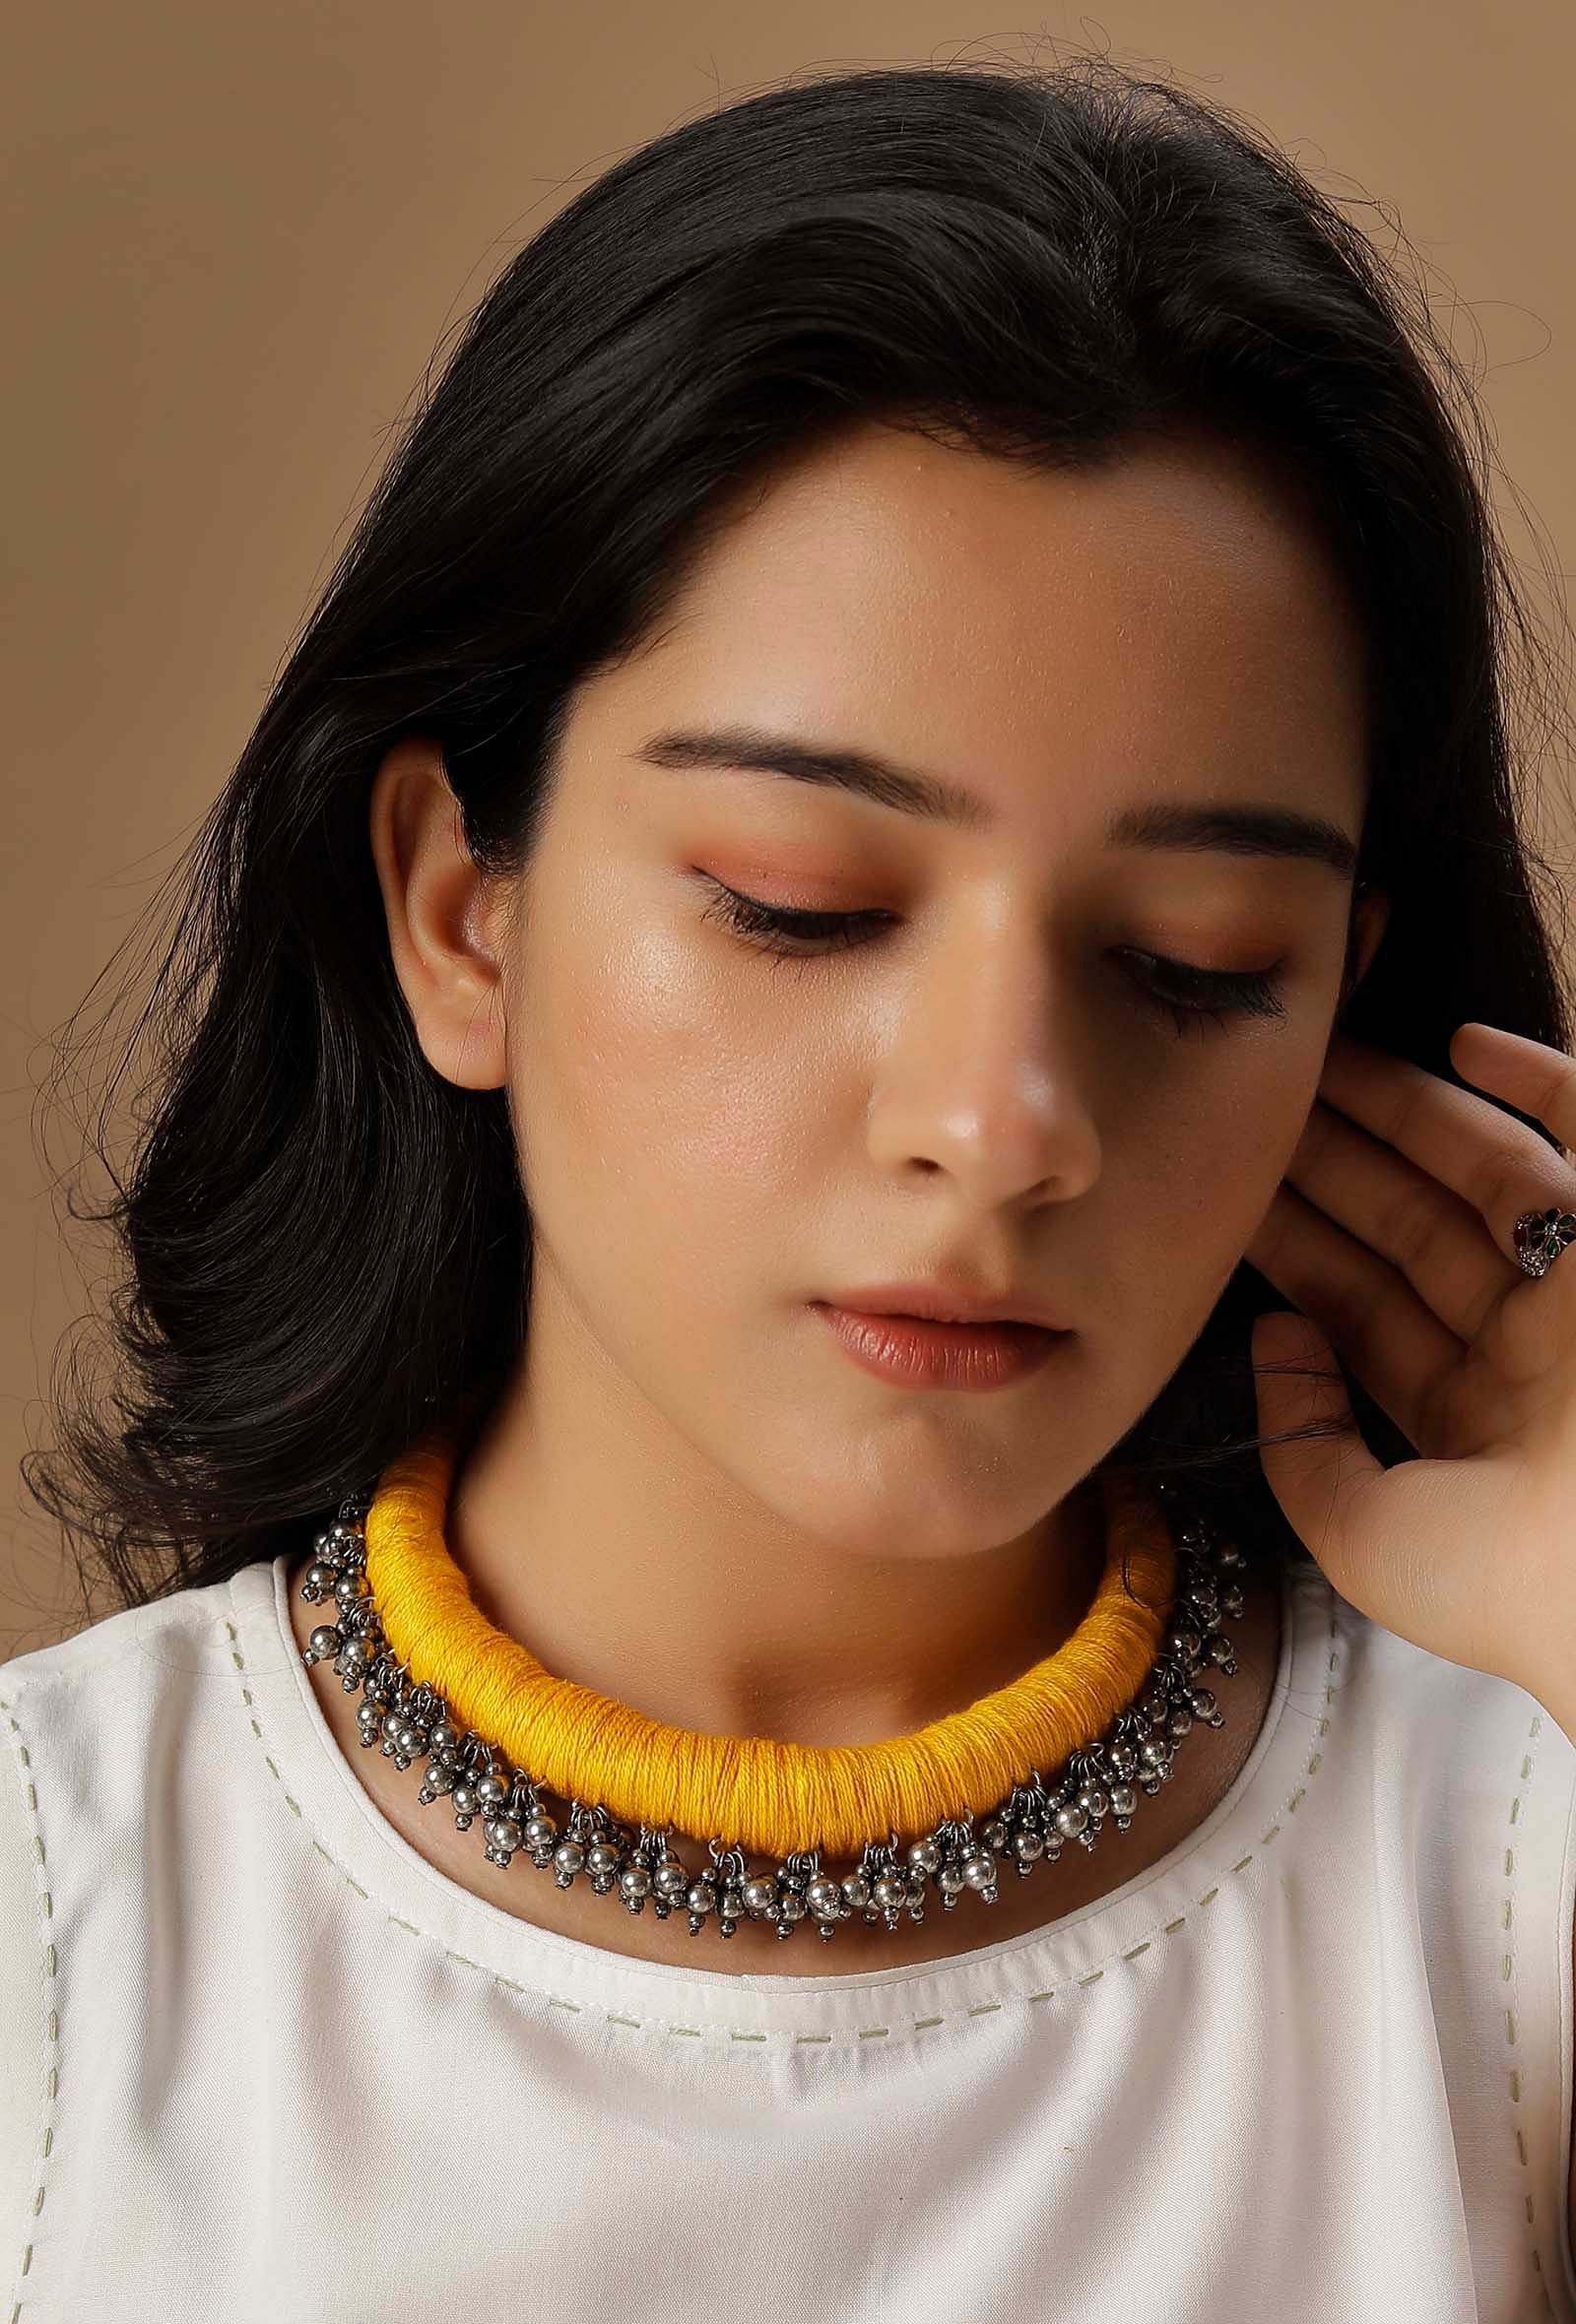 Moska Yellow Tribal Ghungroo Necklace